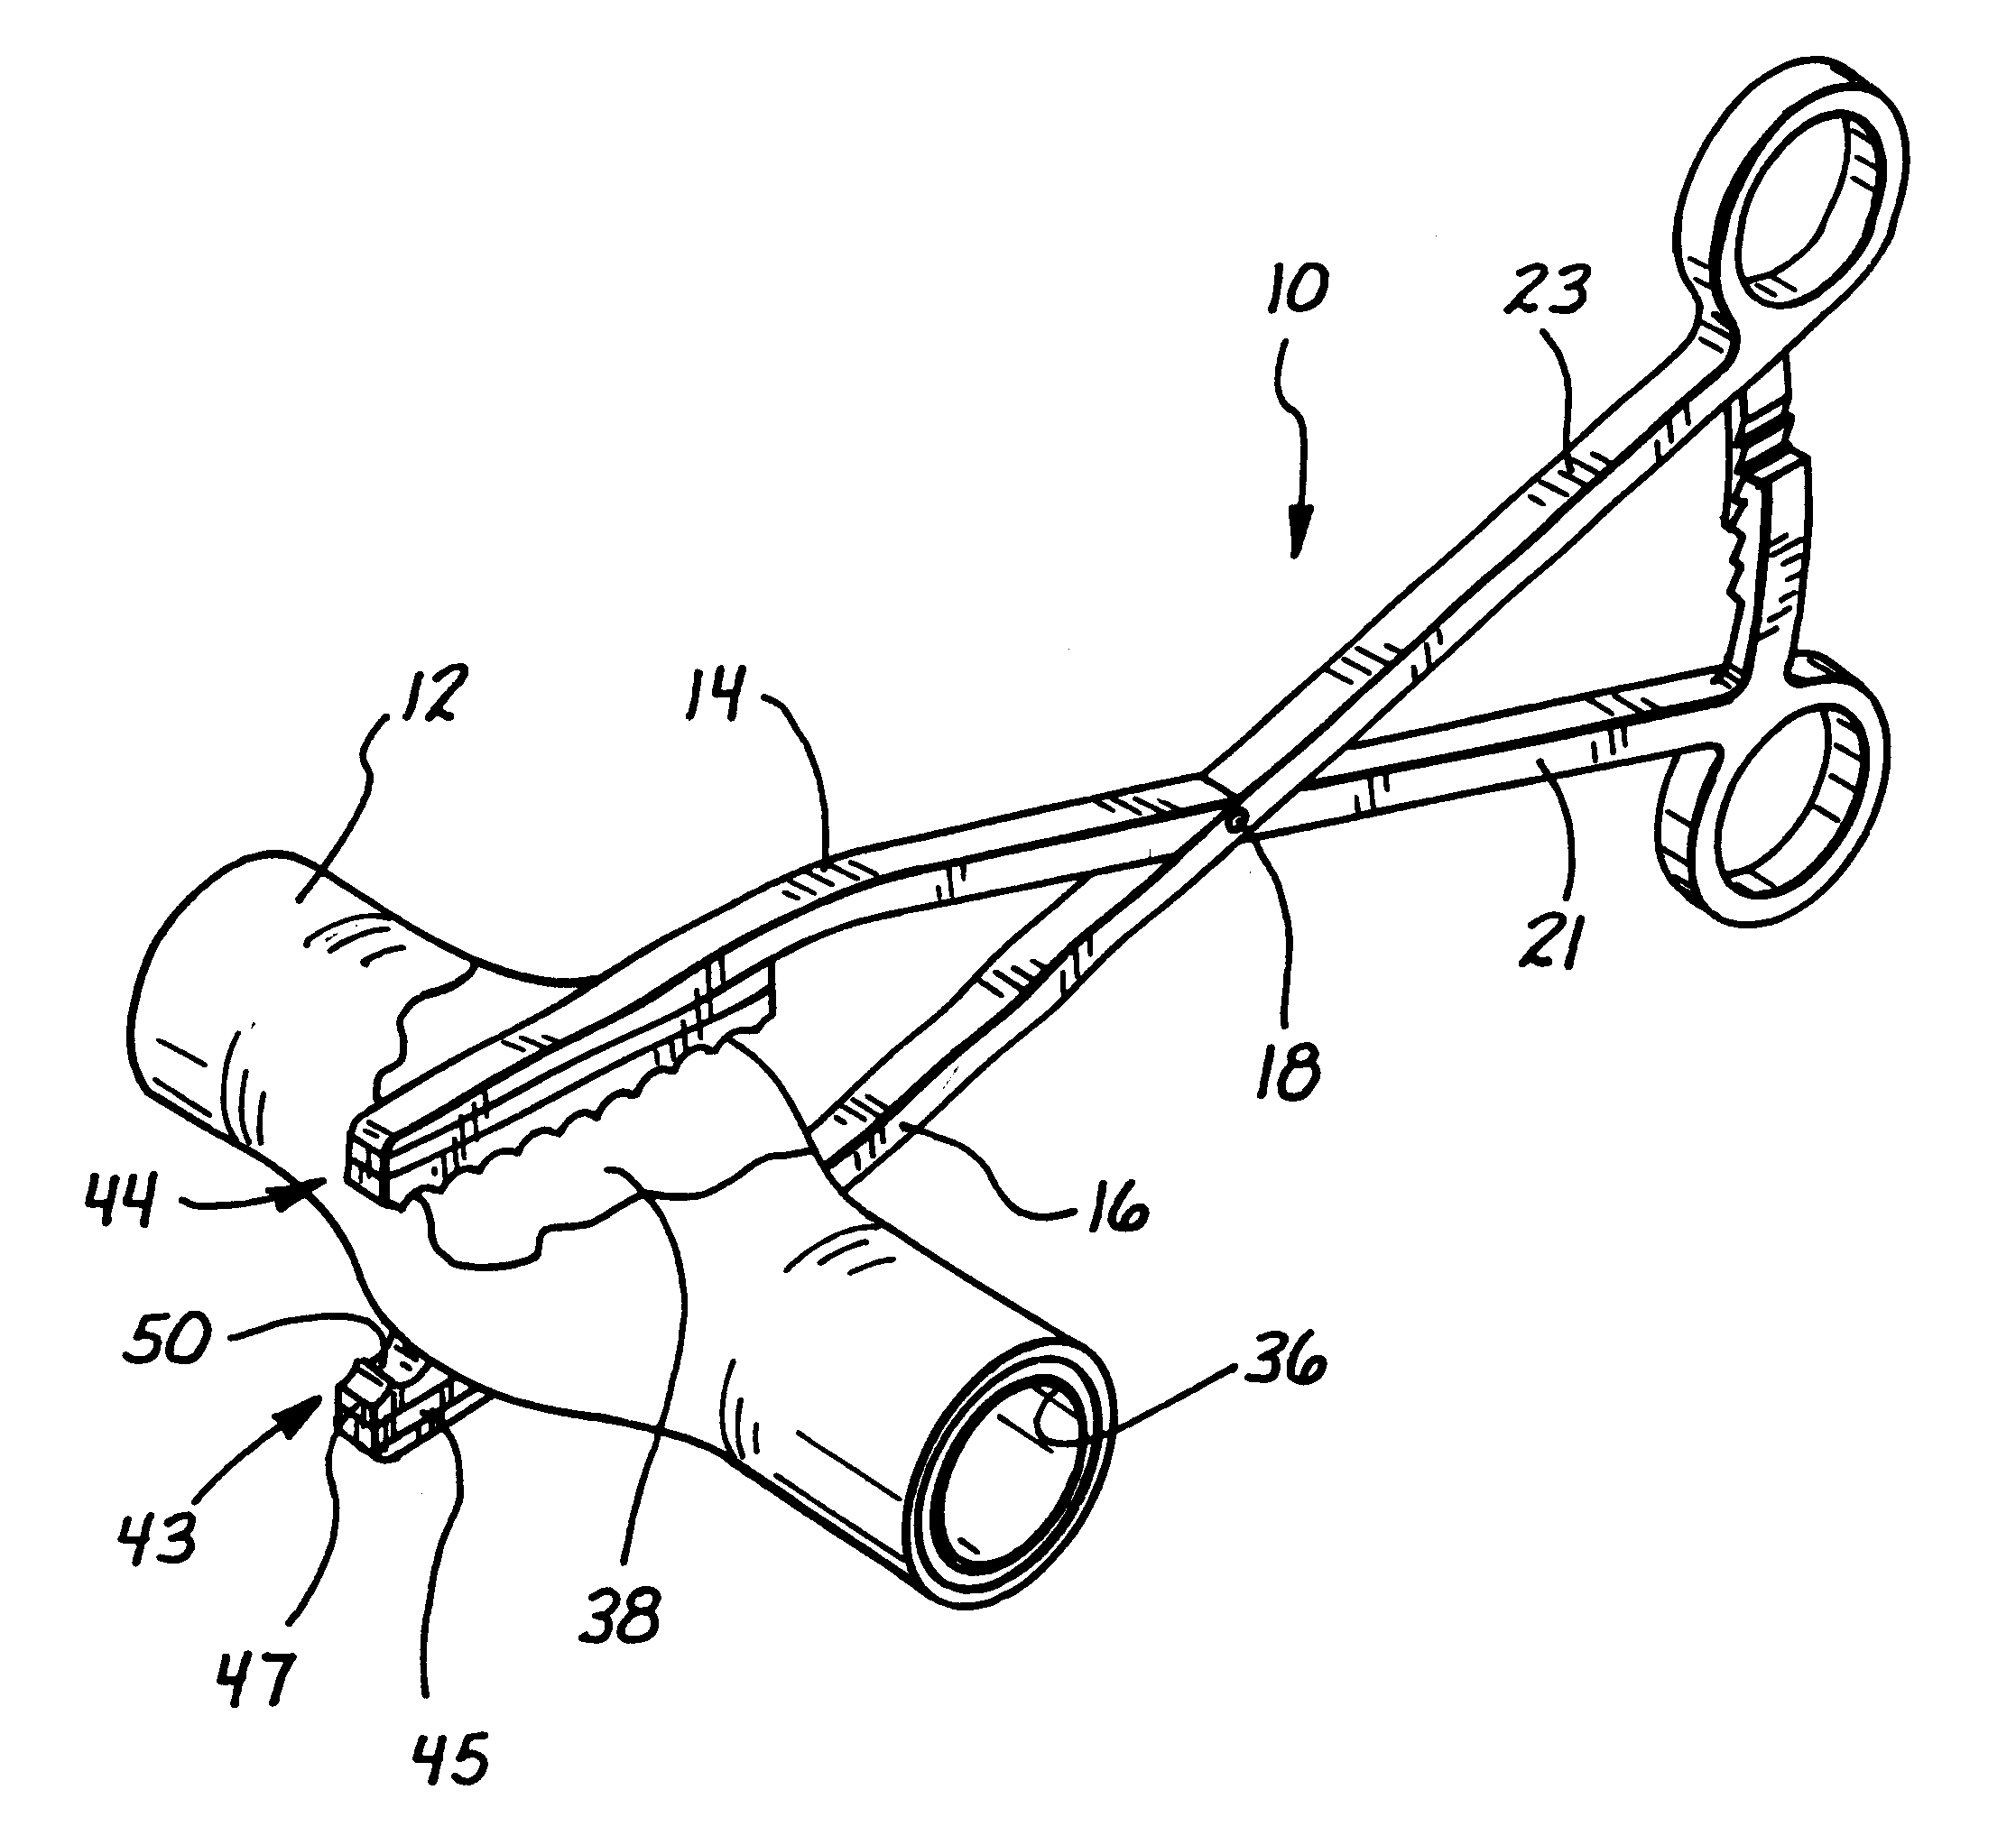 Surgical clamp with improved traction